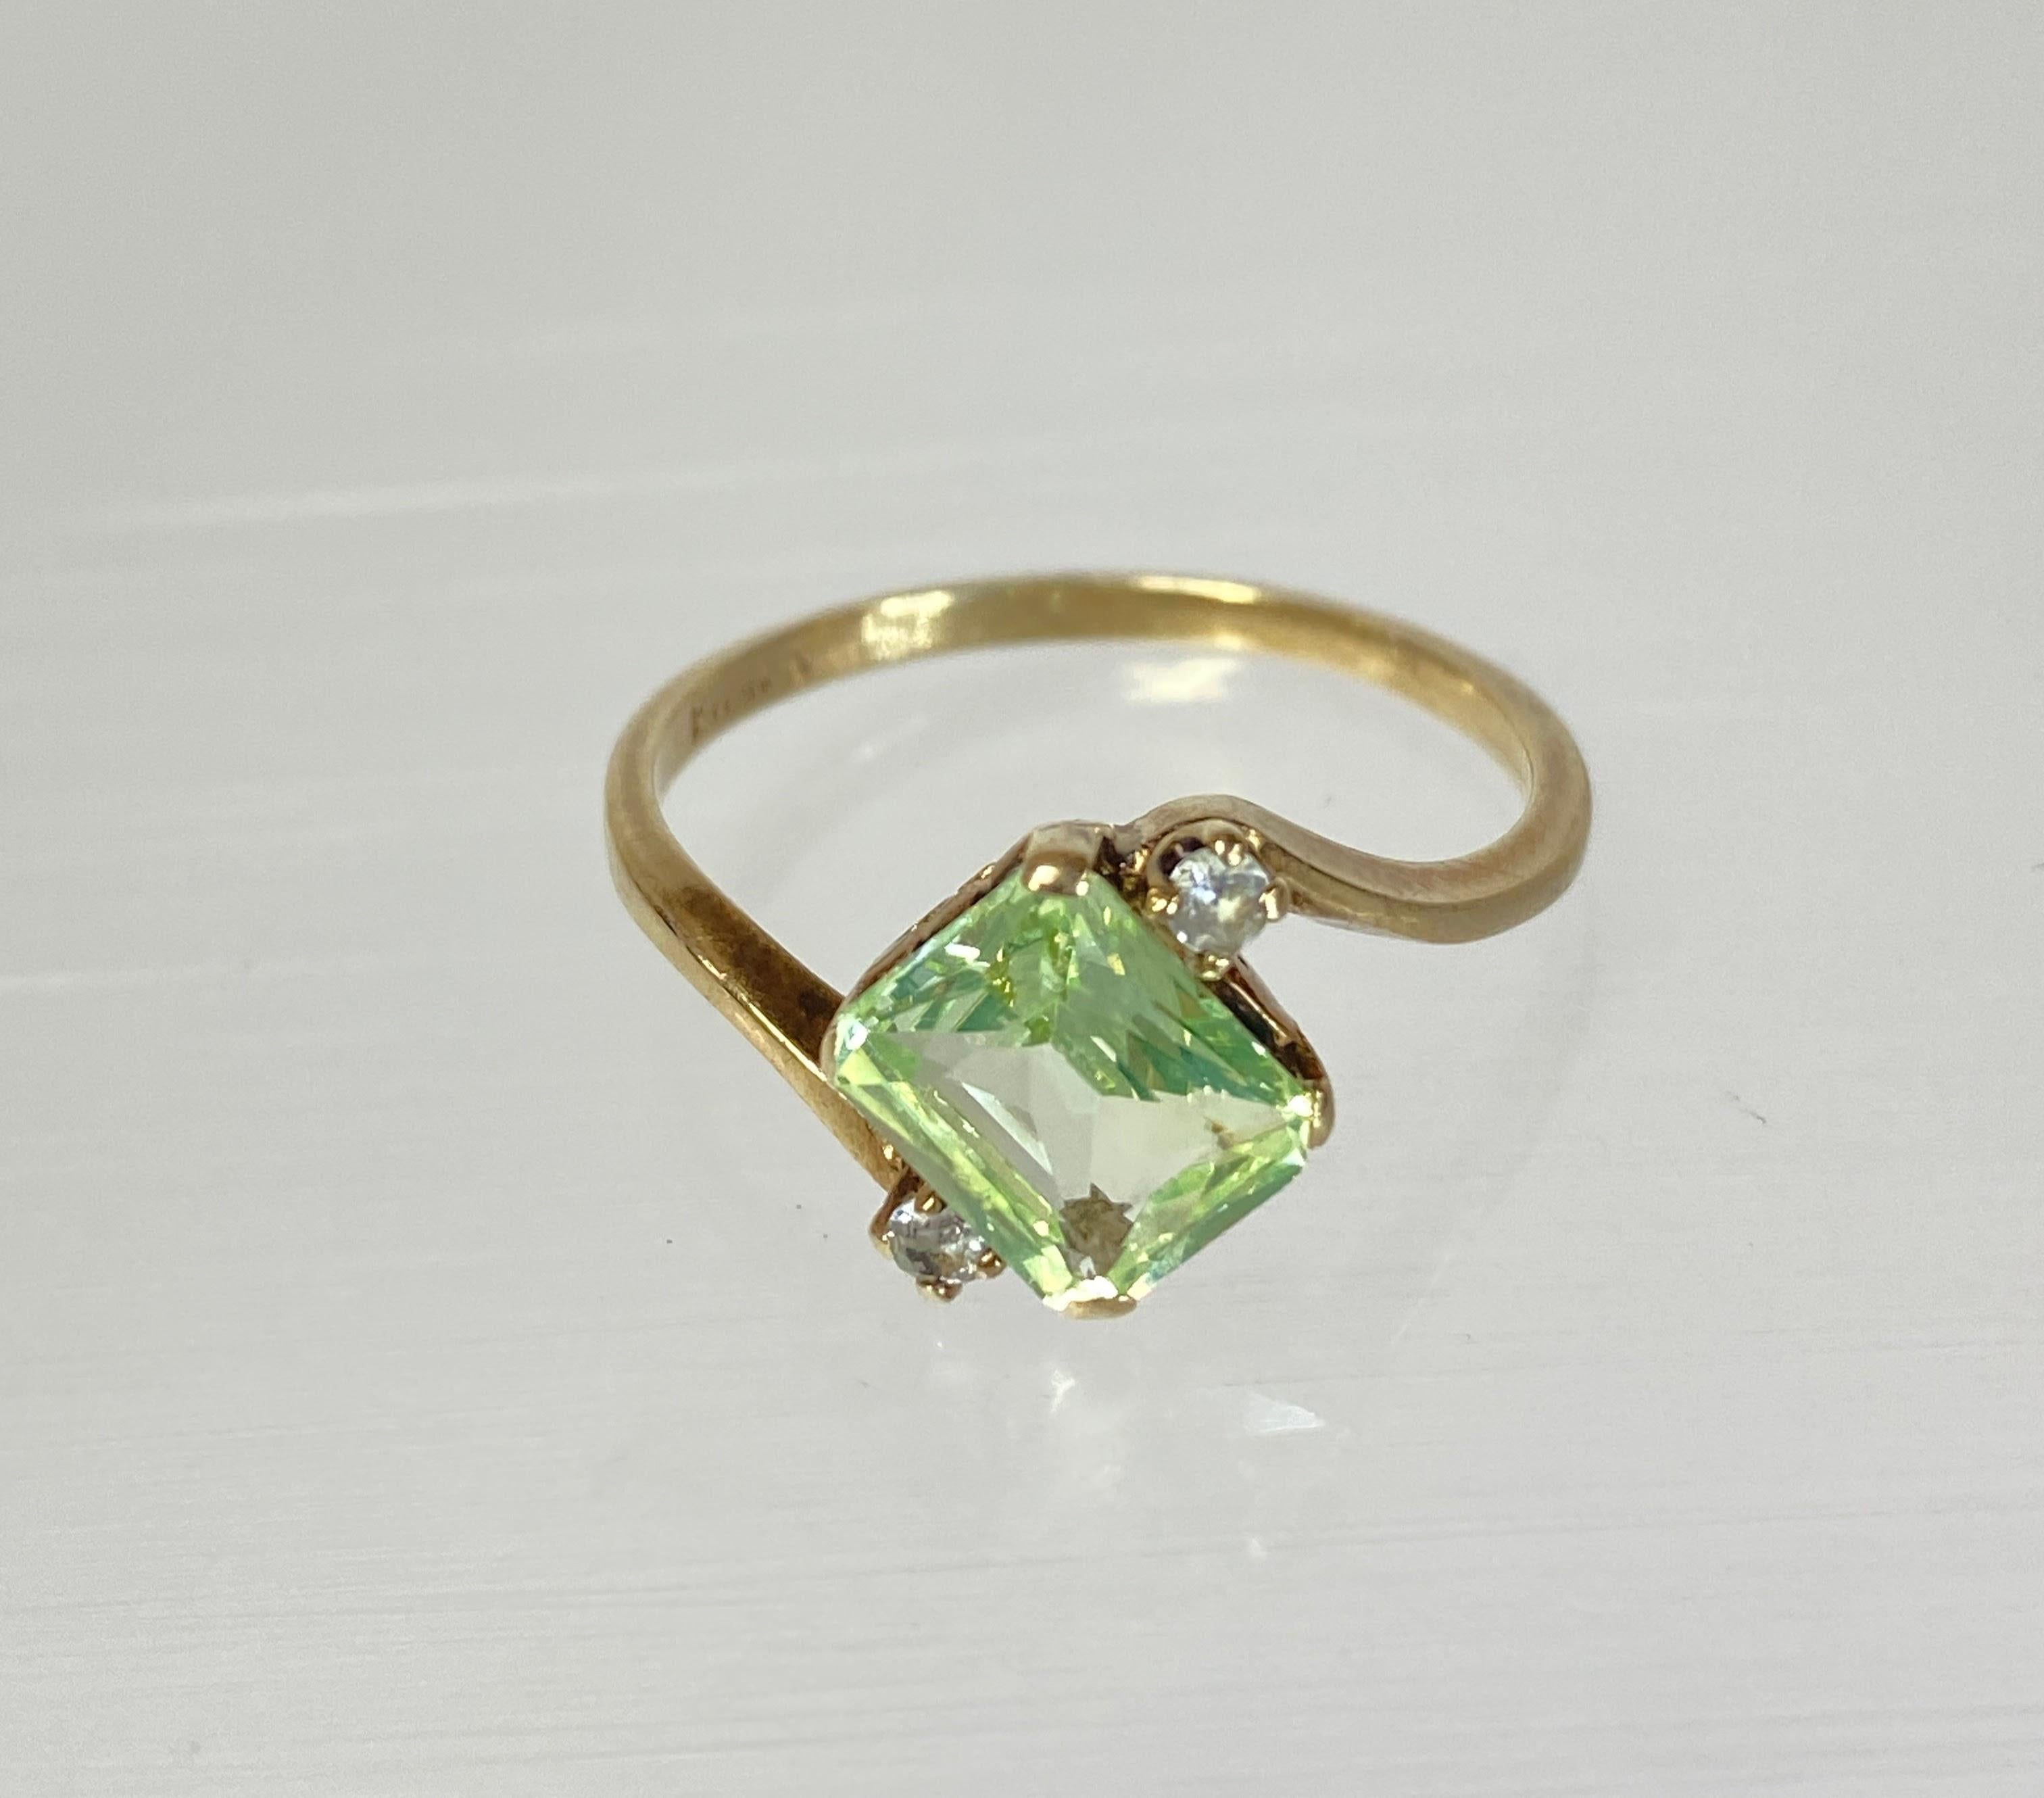 Modern 10K Yellow Gold Old Fashioned Emerald Cut Green Beryl Solitaire Ring Size 8.25